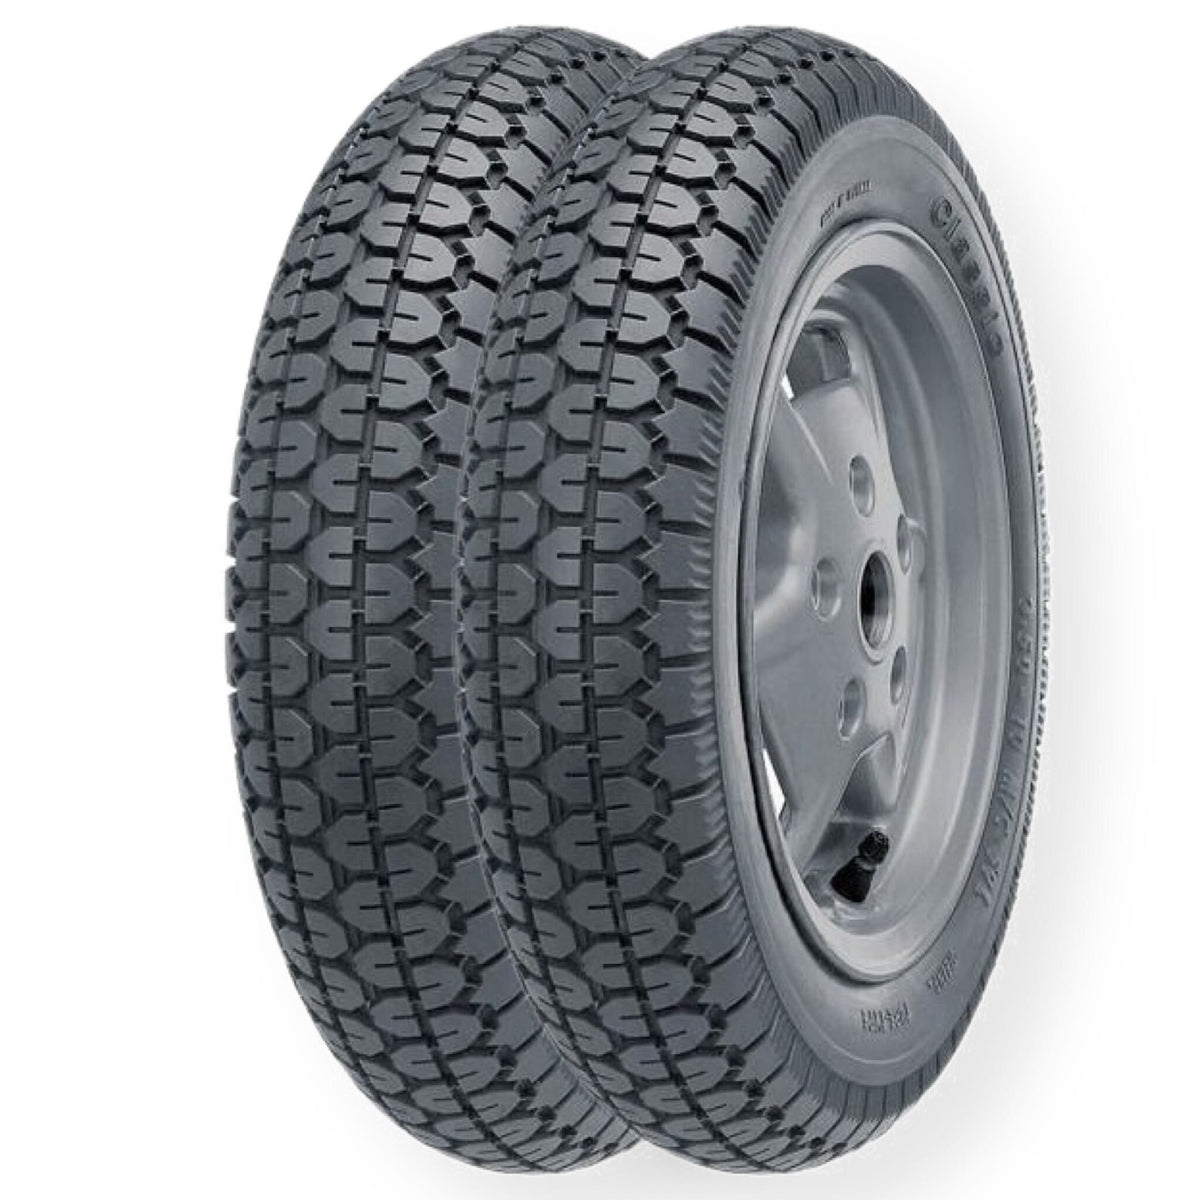 Continental - 300 X 10 - ContiClassic - Tubed Only - 2 Tyre Bundle